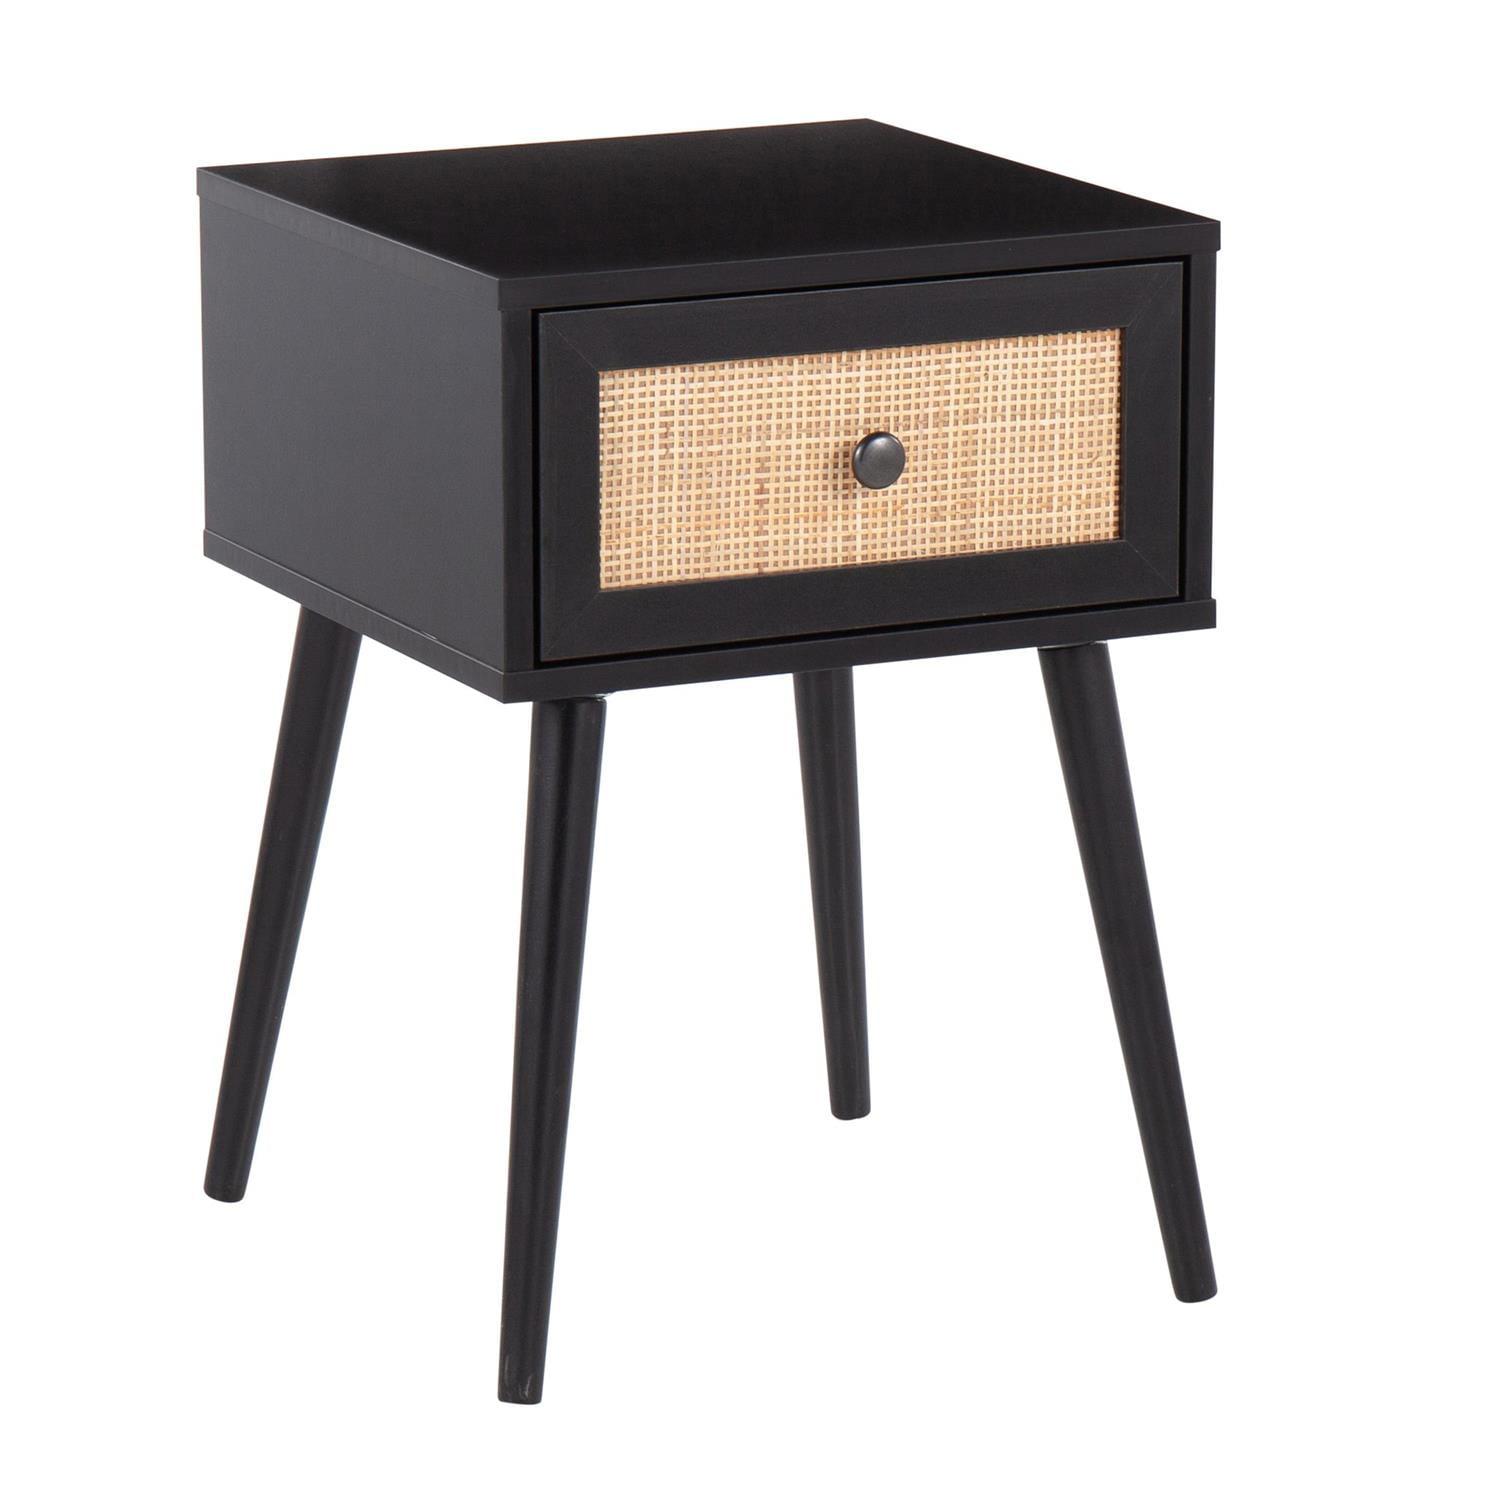 Bora Bora Black Wood and Rattan Accent Side Table with Storage